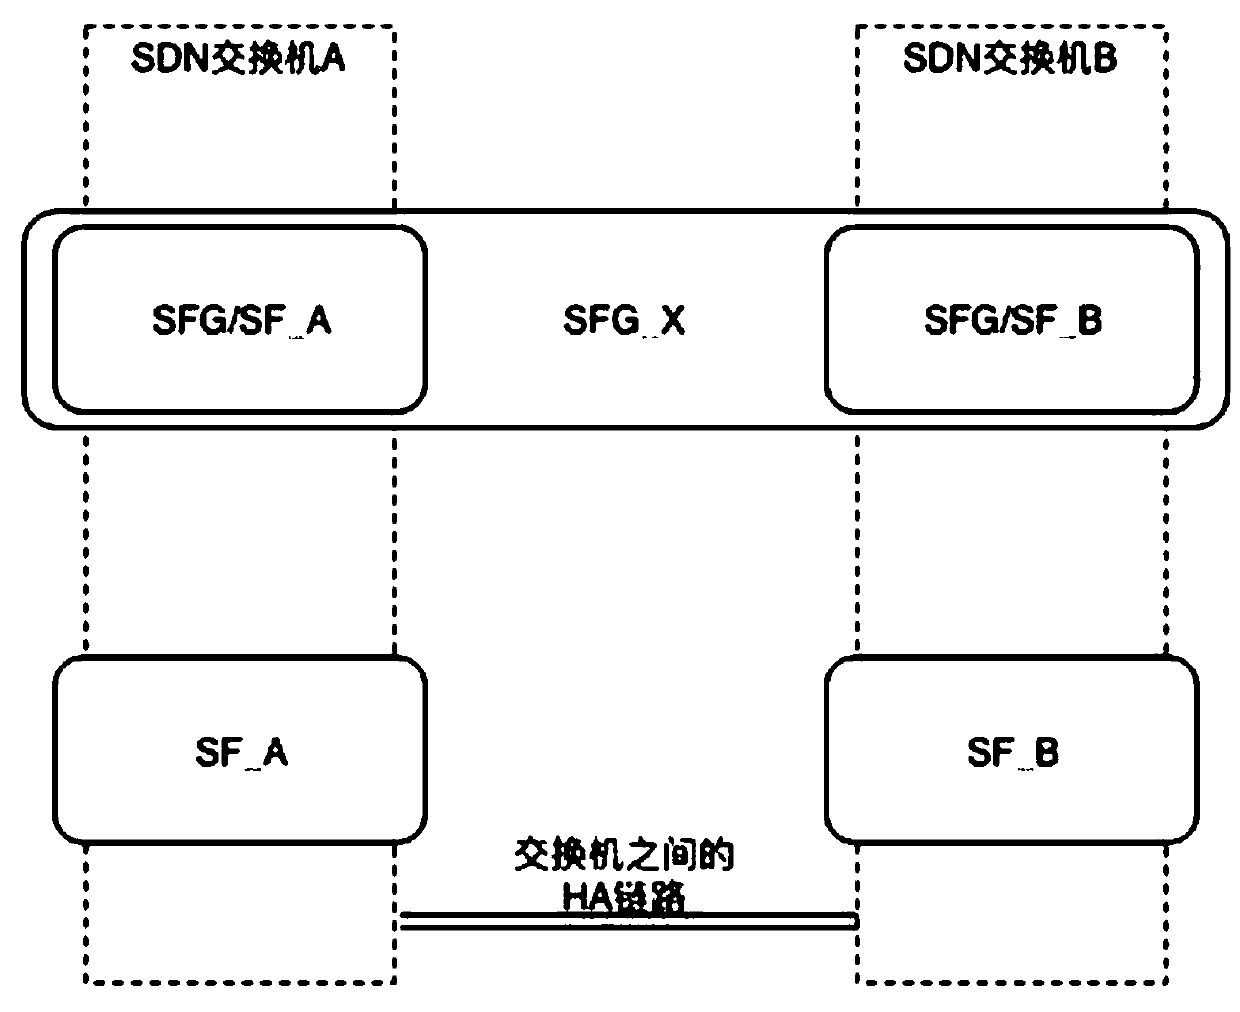 A service chain high-availability method applied to an SDN network